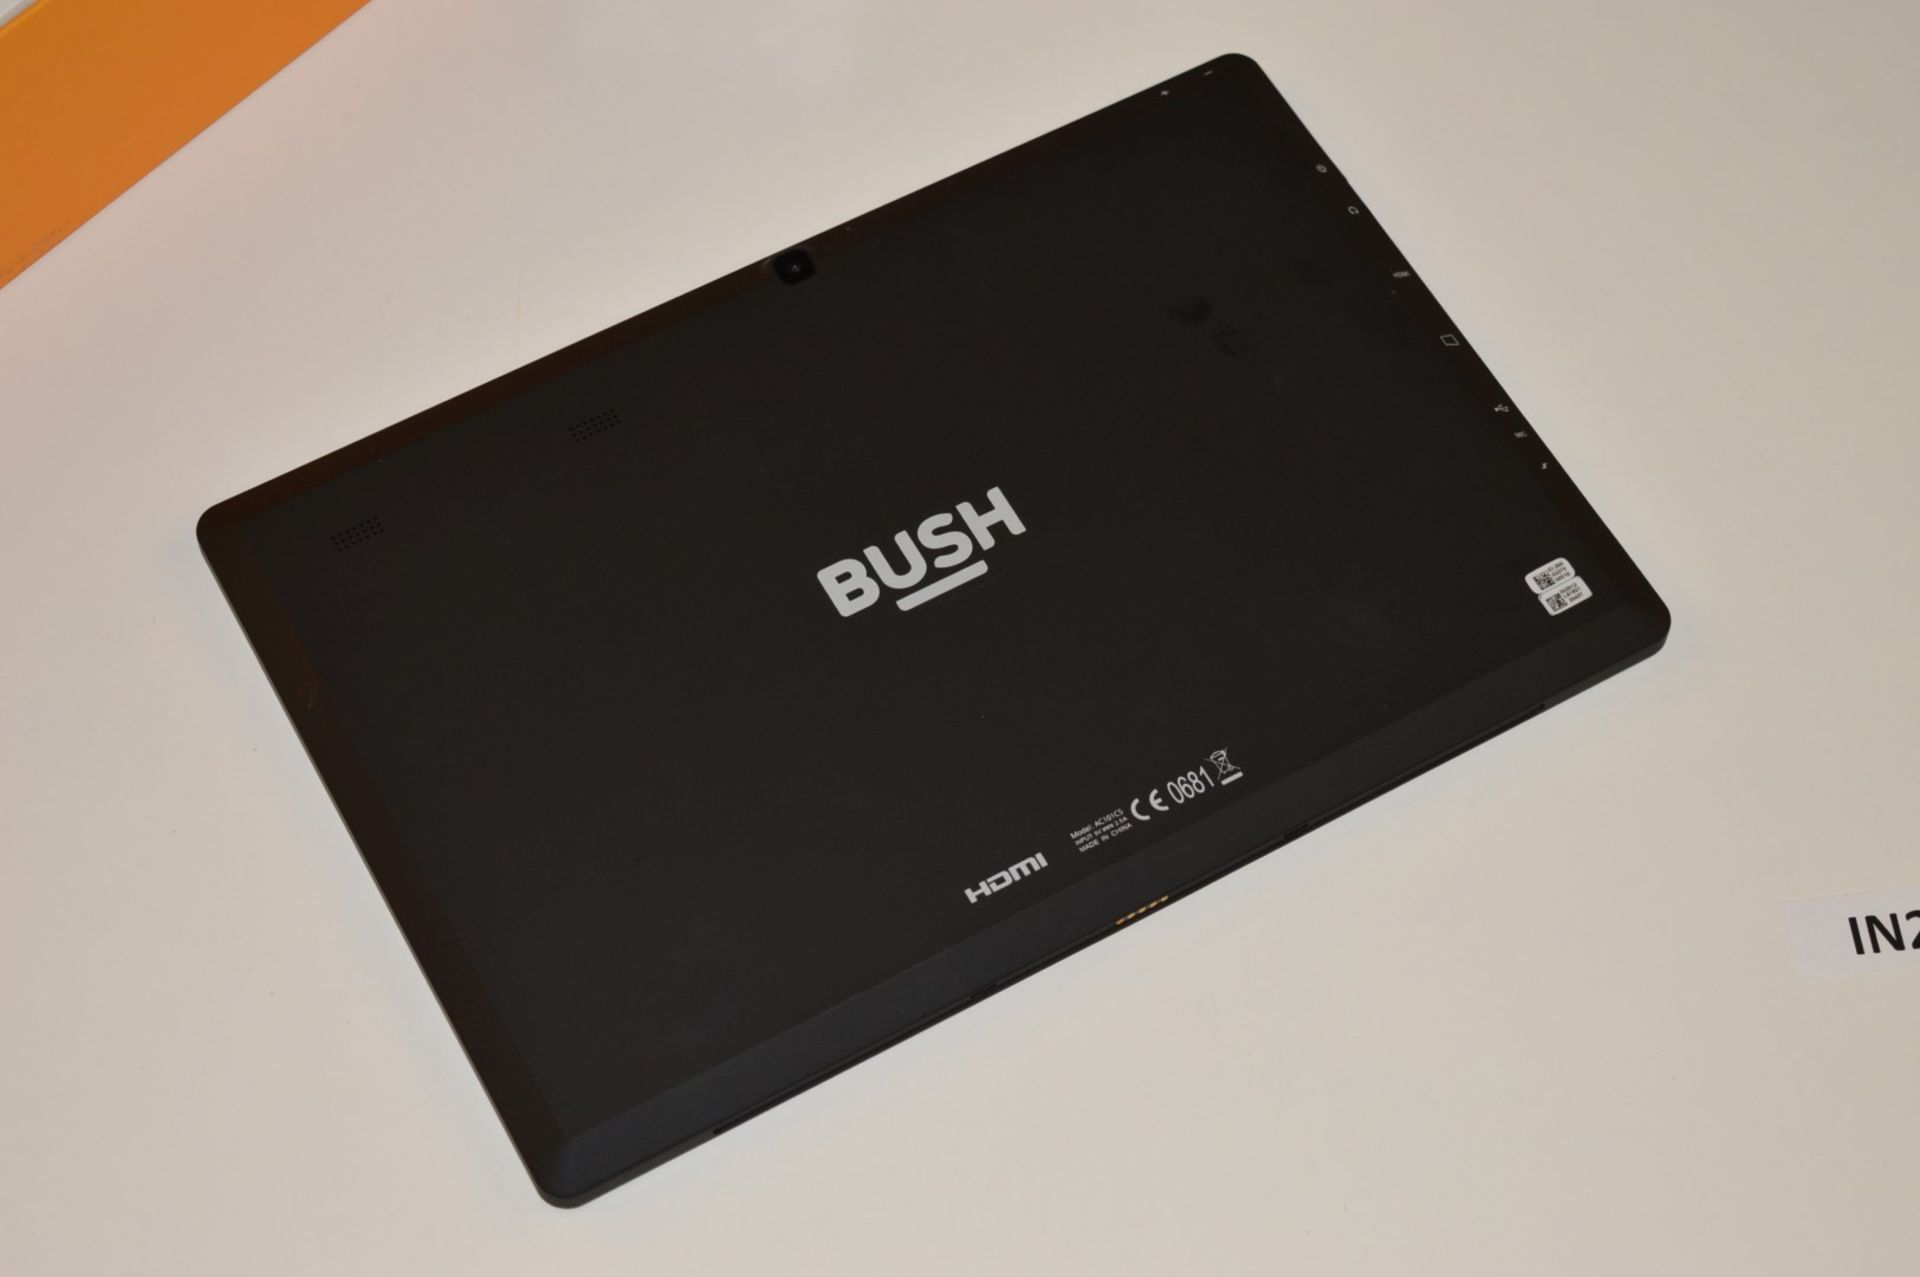 1 x Bush A1 10.1 Inch Windows Tablet - Features Include Intel Atom 1.8ghz Quad Core Processor, 1gb - Image 8 of 11